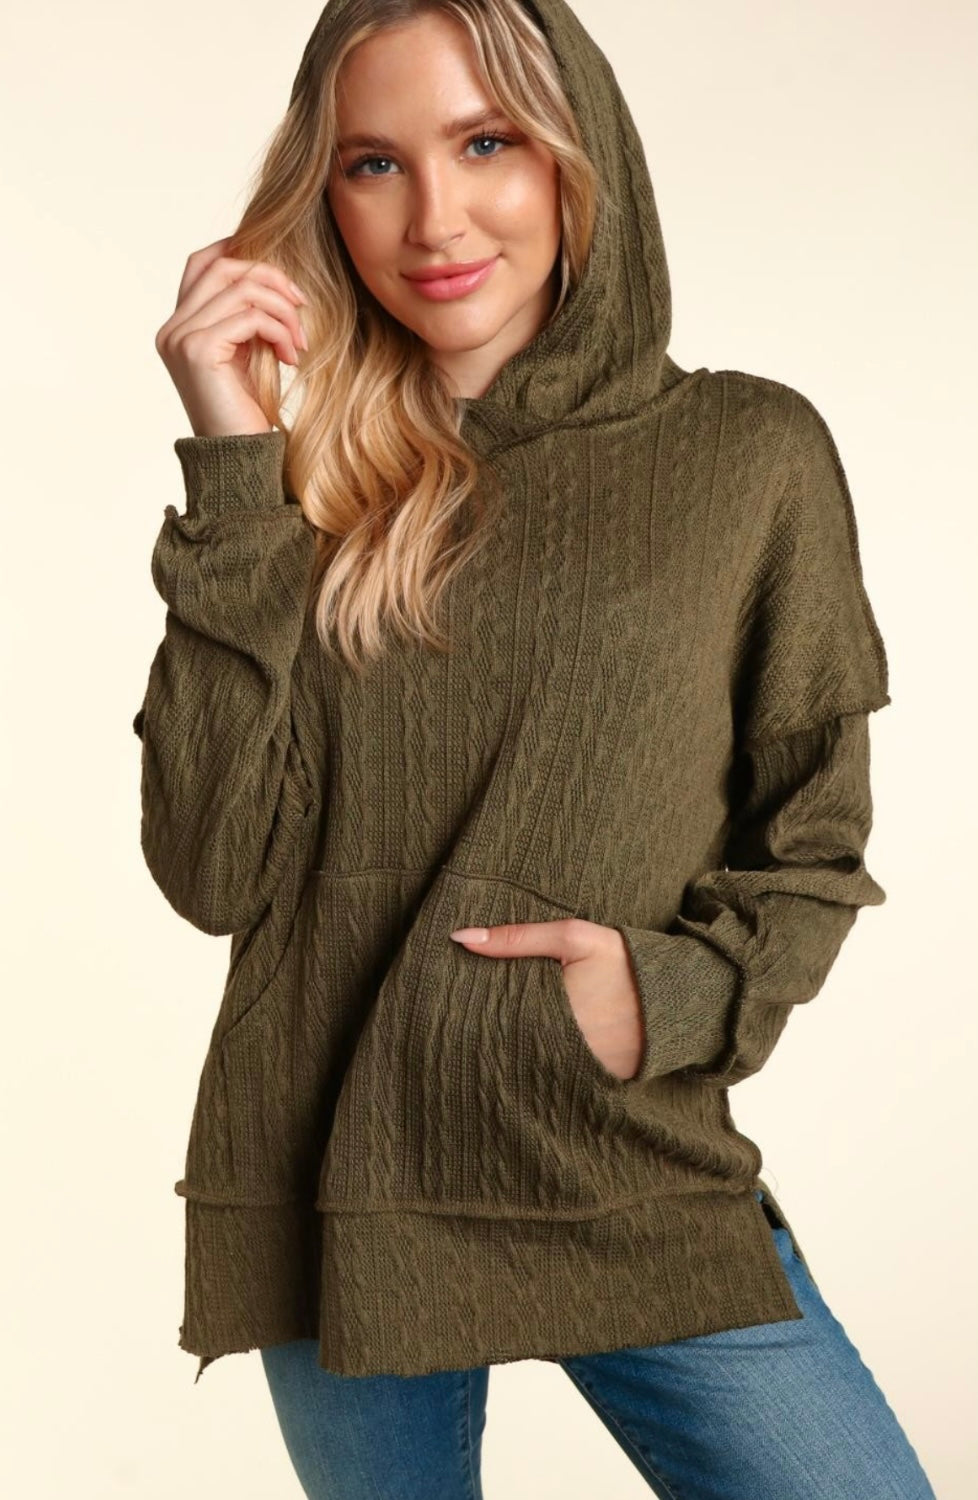 Dark Olive Cable Knit Textured Hooded Shirt